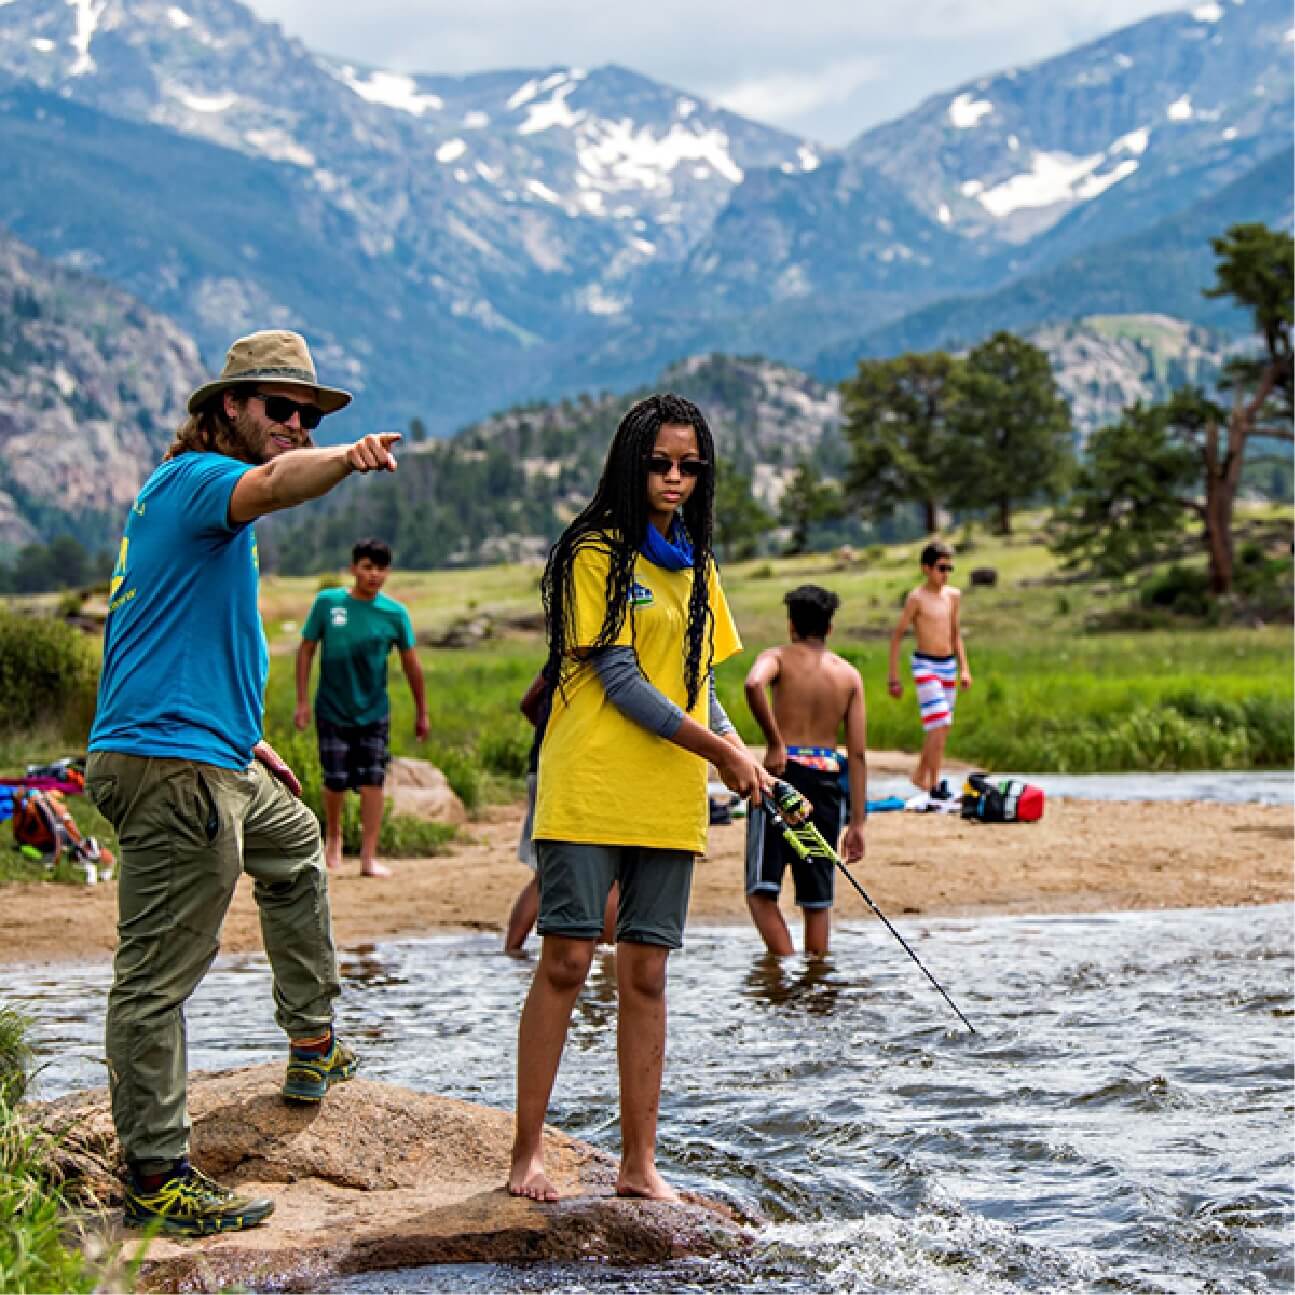 Our Featured Partners.  Click here to learn more about the Environmental Learning for Kids organization that serves urban youth year round through outdoor education programs. The picture shown is a teacher and his student fishing out in nature.